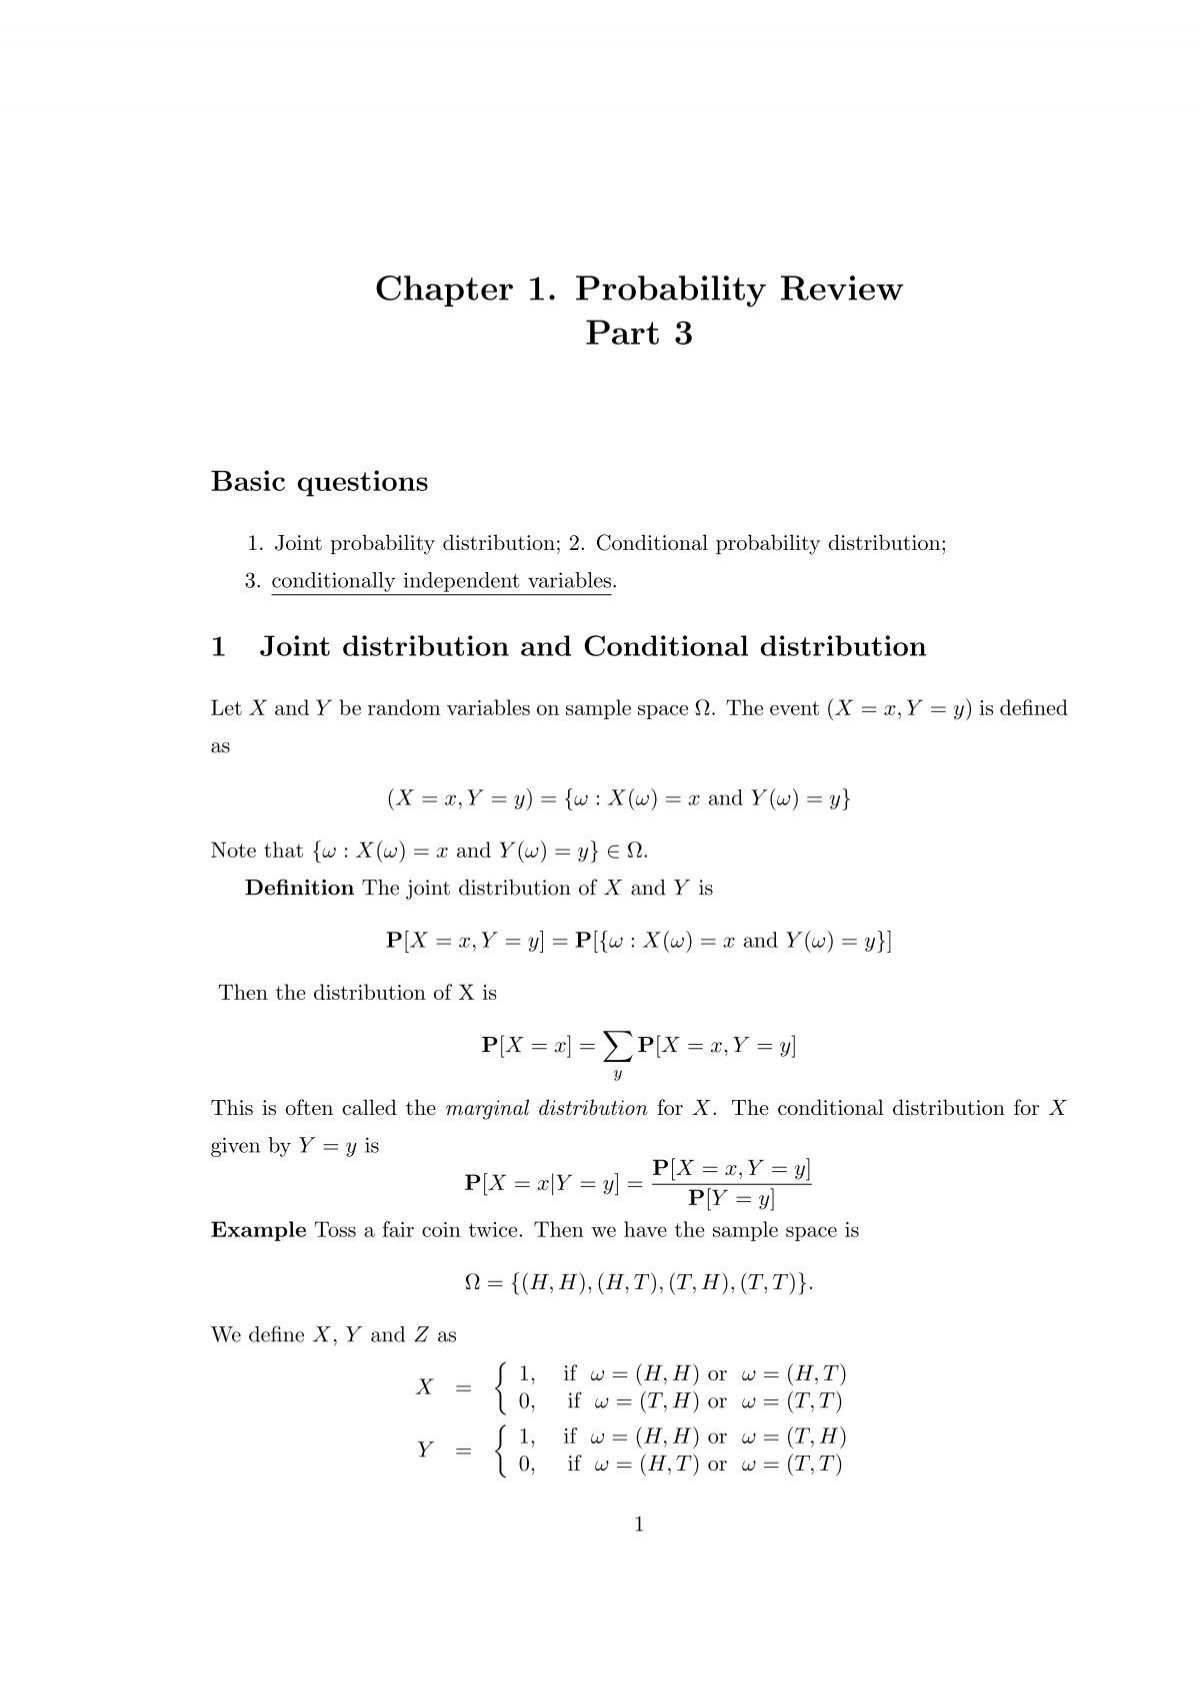 Chapter 1 Probability Review Part 3